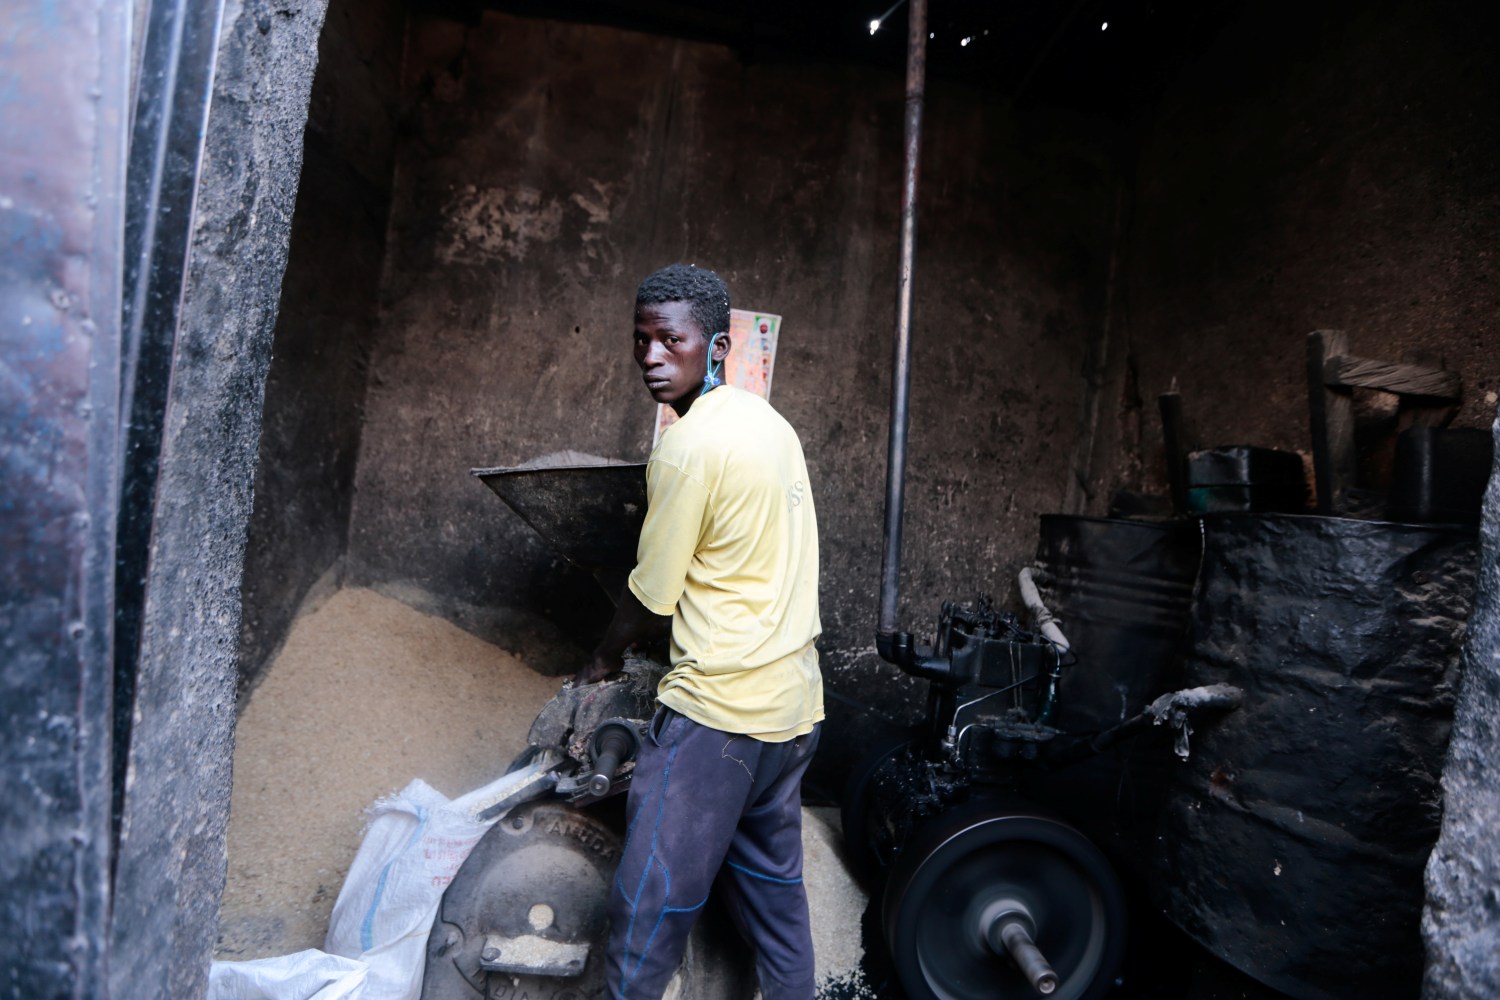 A man grinds grains at a store in Maiduguri, Nigeria October 31, 2021. Picture taken October 31, 2021. REUTERS/Afolabi Sotunde